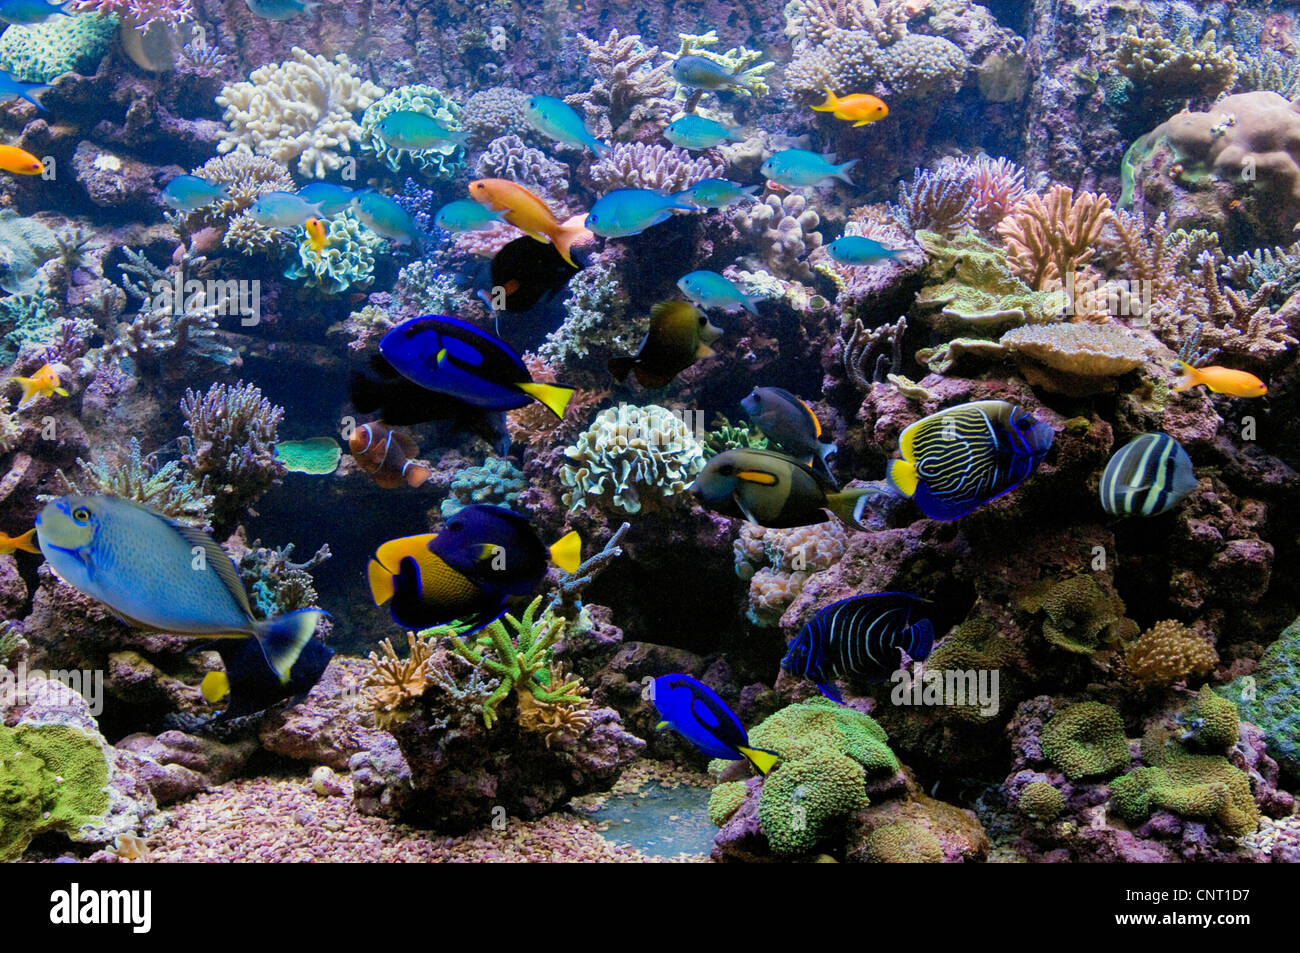 horn corals (Acropora spec.), Large and stunning coral reef aquarium with stony corals (mainly Acropora spp.) and fishes Stock Photo